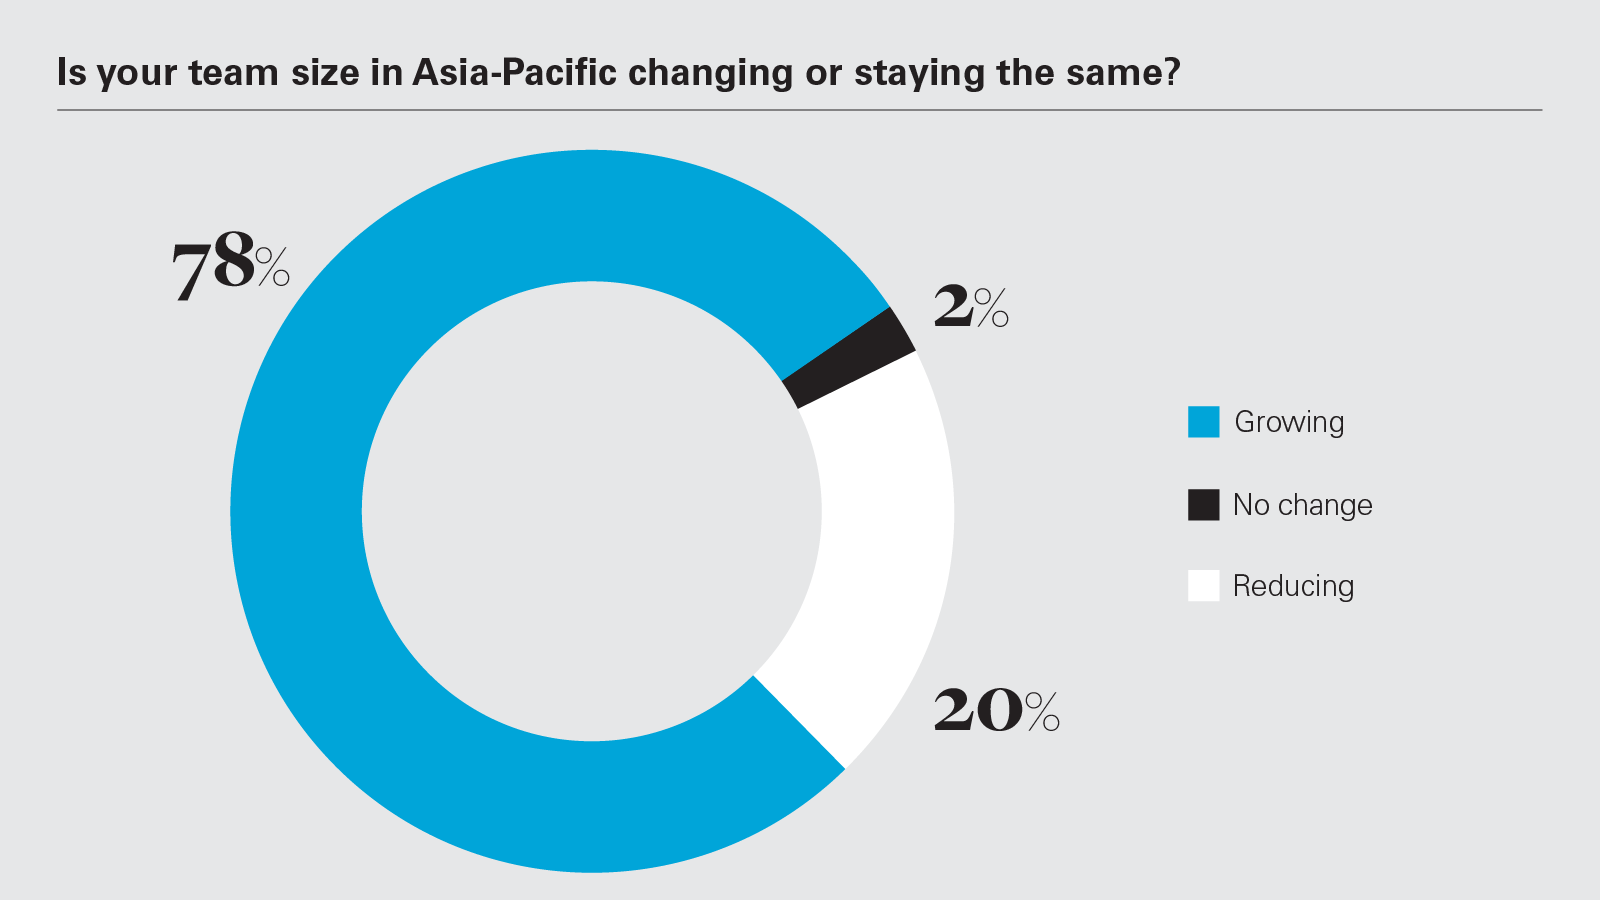 Is your team size in Asia-Pacific changing or staying the same?